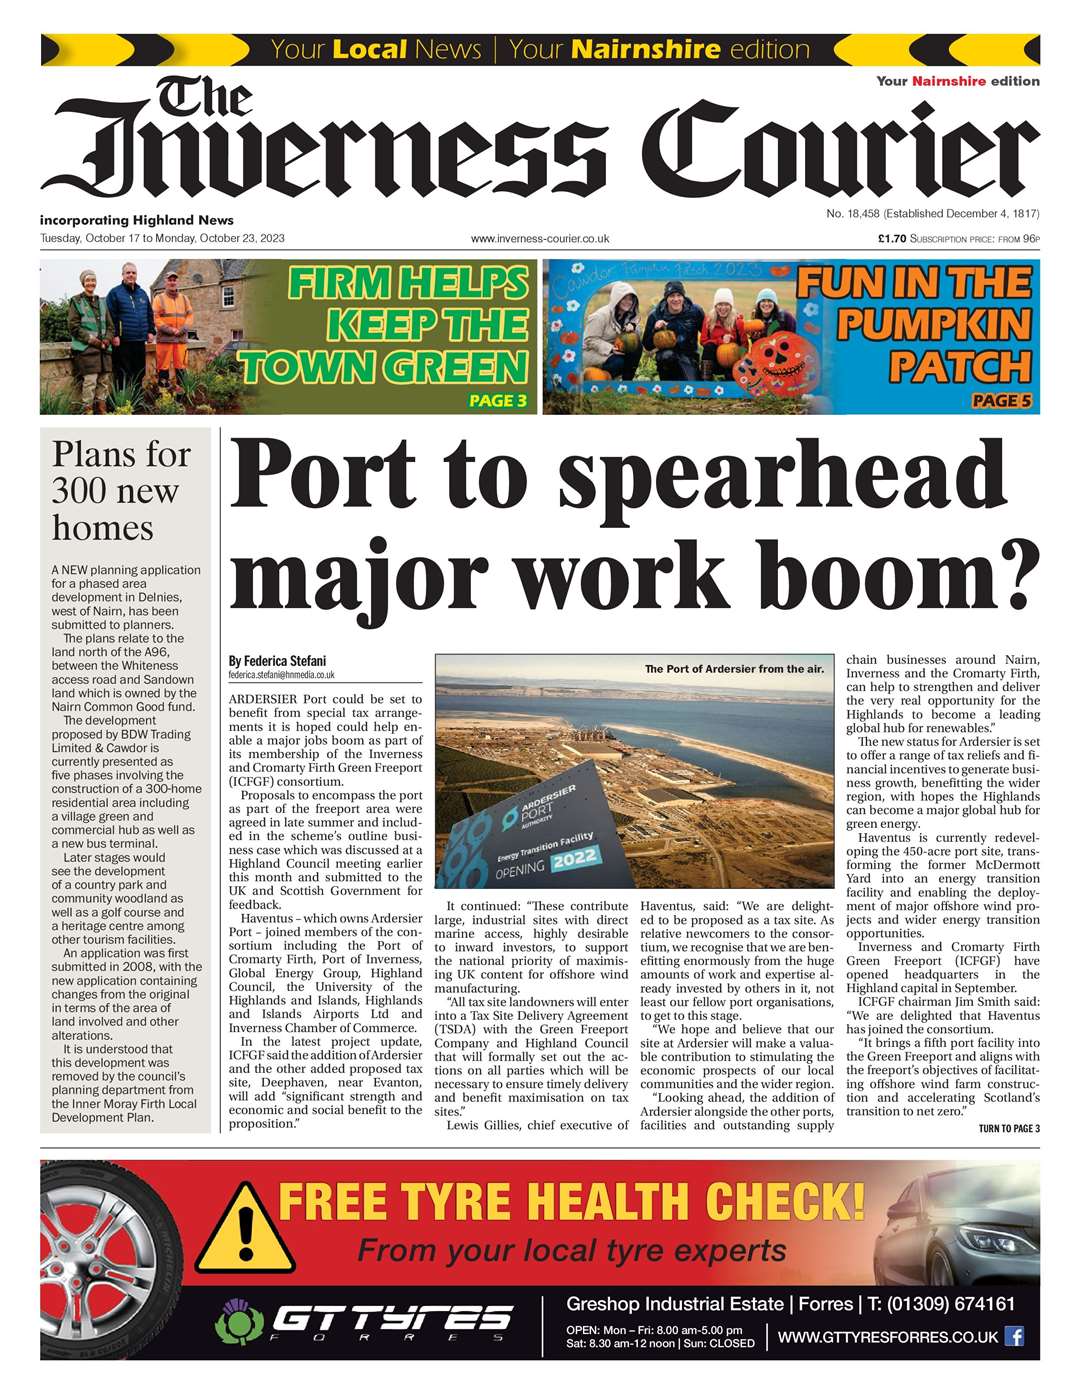 The Inverness Courier (Nairnshire edition), October 17, front page.